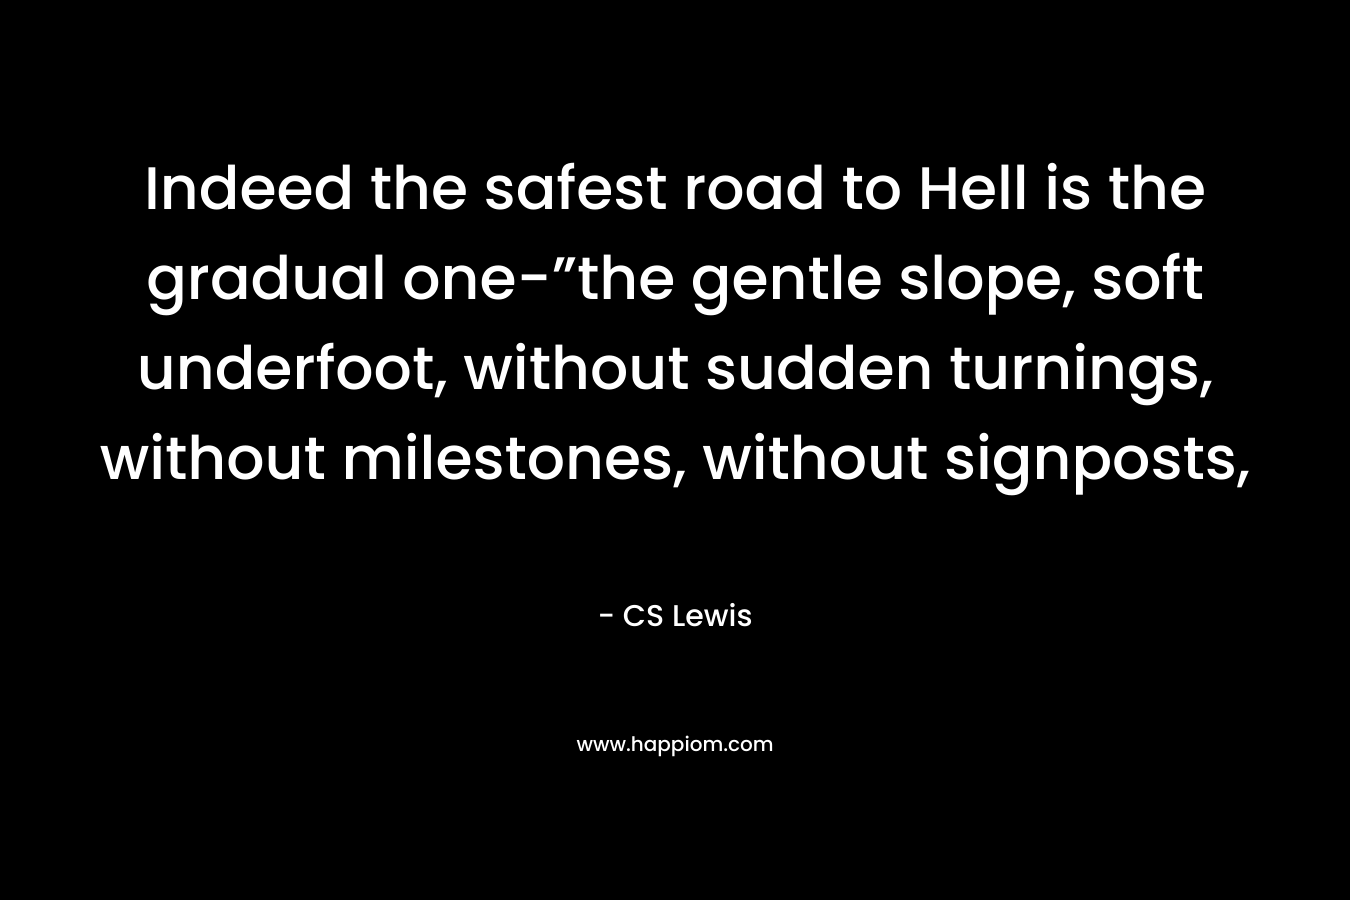 Indeed the safest road to Hell is the gradual one-”the gentle slope, soft underfoot, without sudden turnings, without milestones, without signposts, – CS Lewis